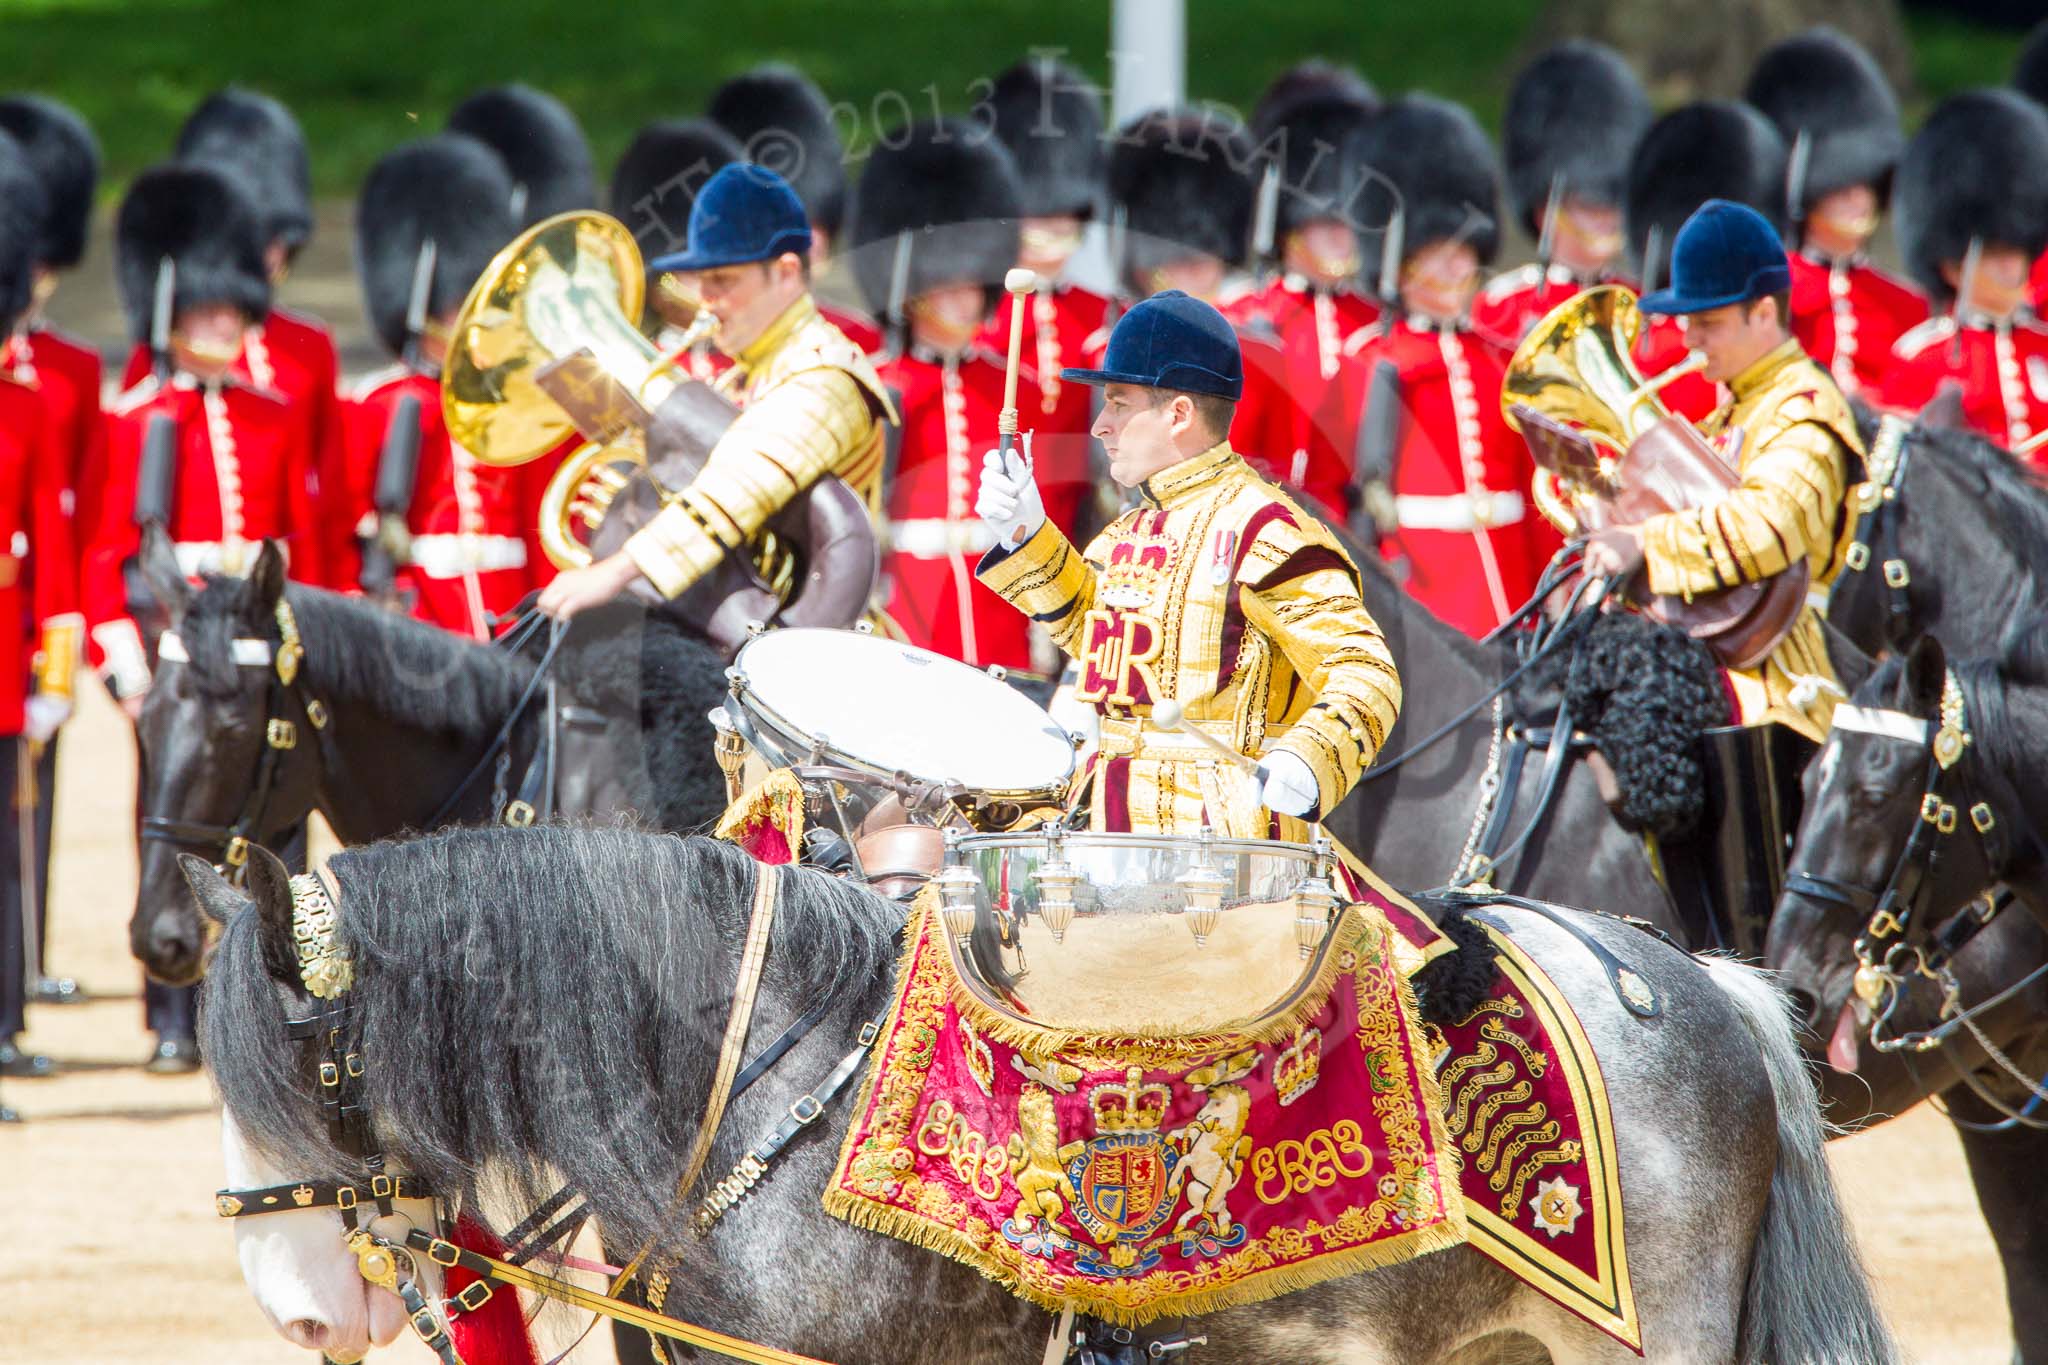 Trooping the Colour 2013: The Ride Past - the Mounted Bands of the Household Cavalry move, from the eastern side, onto Horse Guards Parade. Here the kettle drummer from The Blues and Royals. Image #653, 15 June 2013 11:53 Horse Guards Parade, London, UK